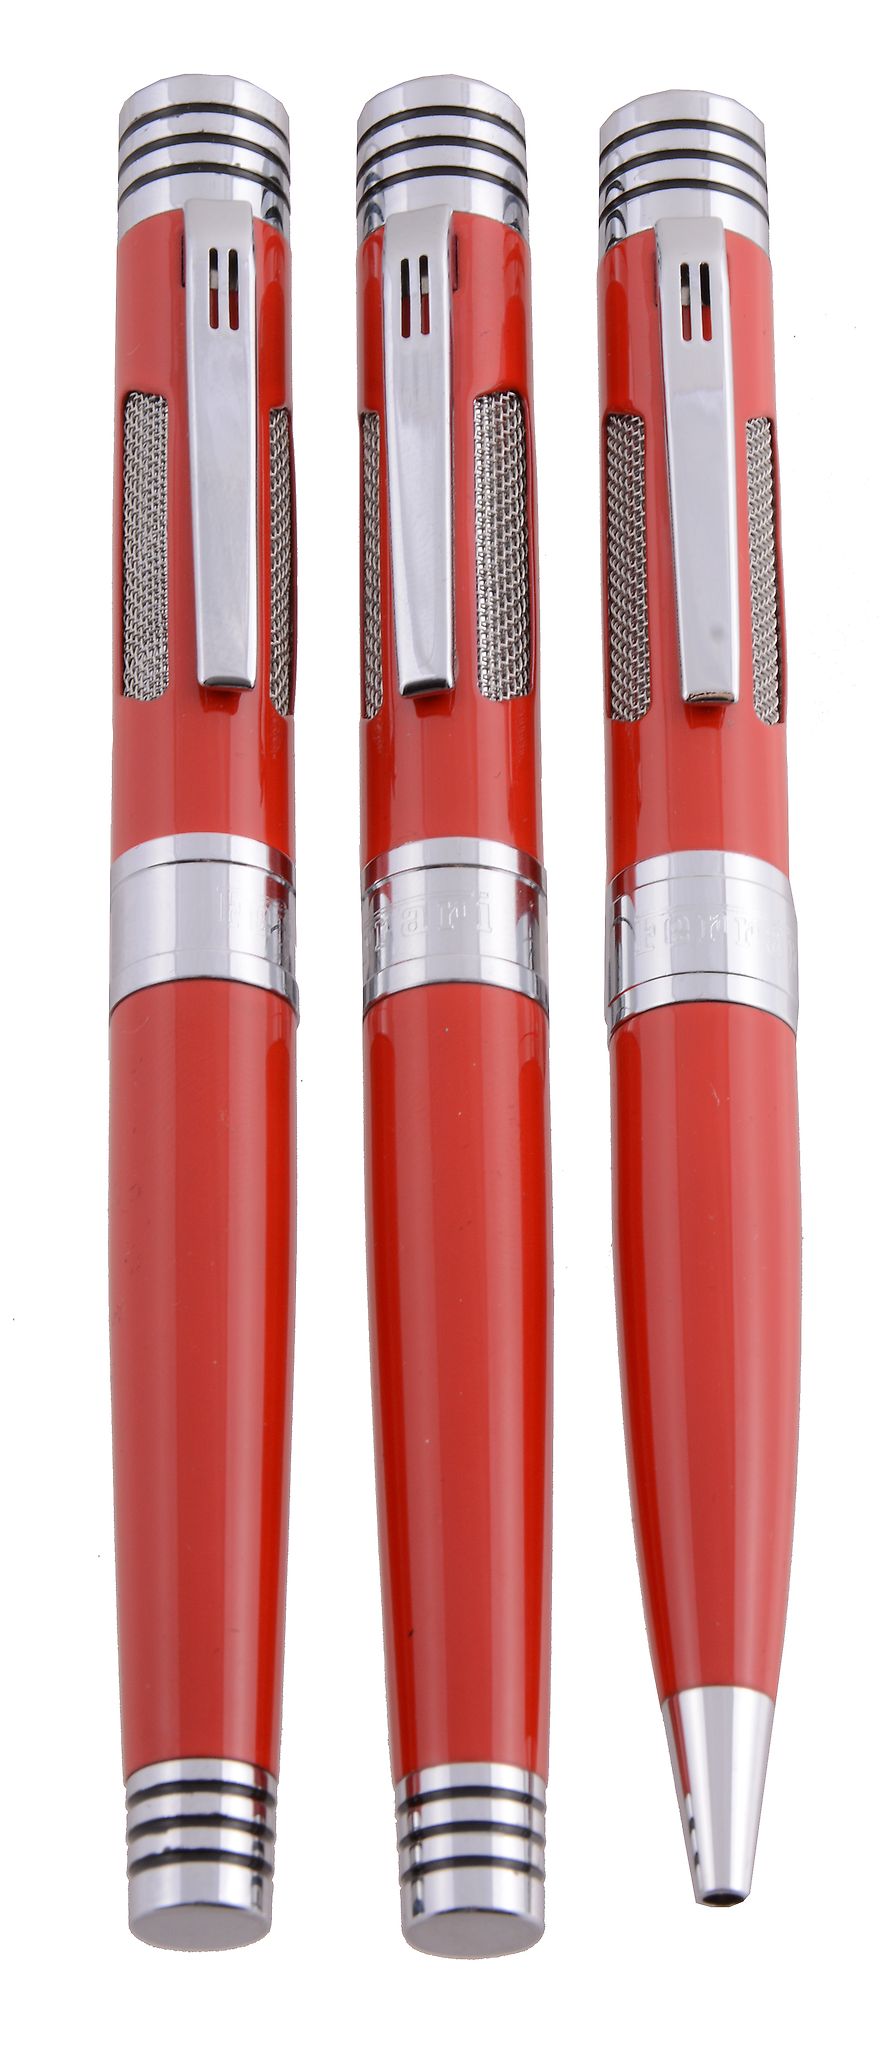 Ferrari, three red pens, the fountain pen with a red cap and barrel   Ferrari, three red pens,   the